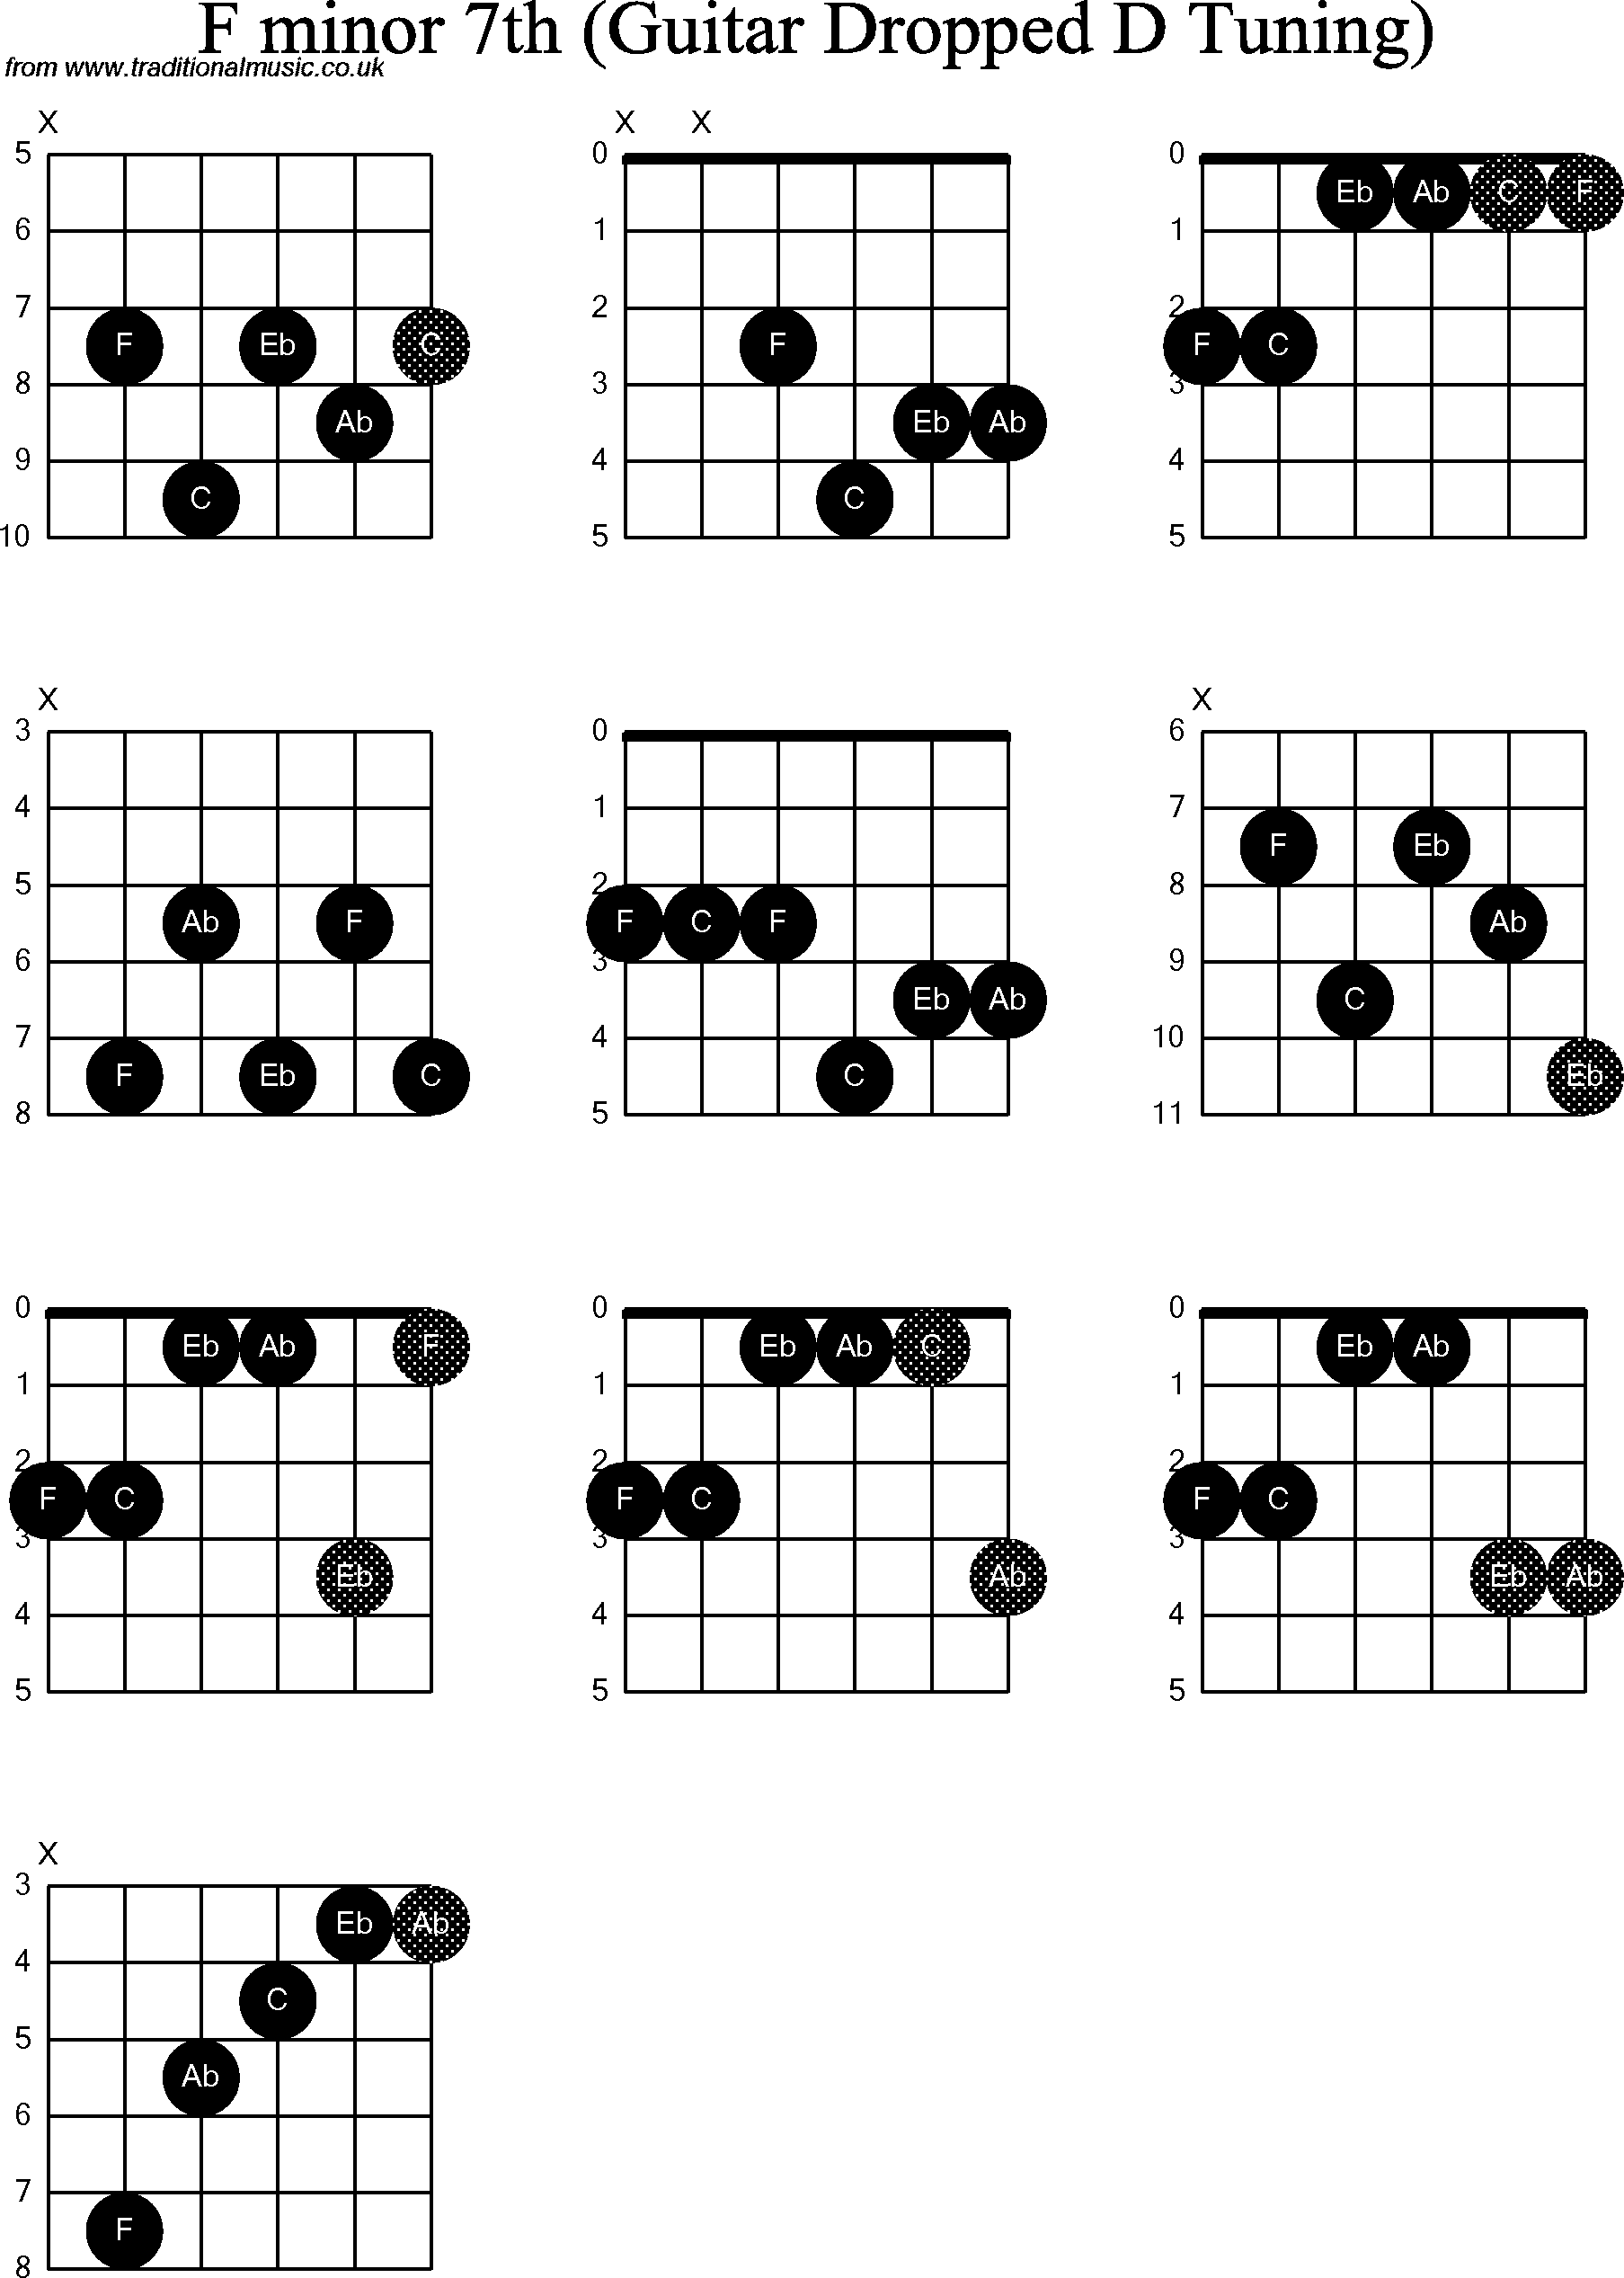 Chord diagrams for dropped D Guitar(DADGBE), F Minor7th